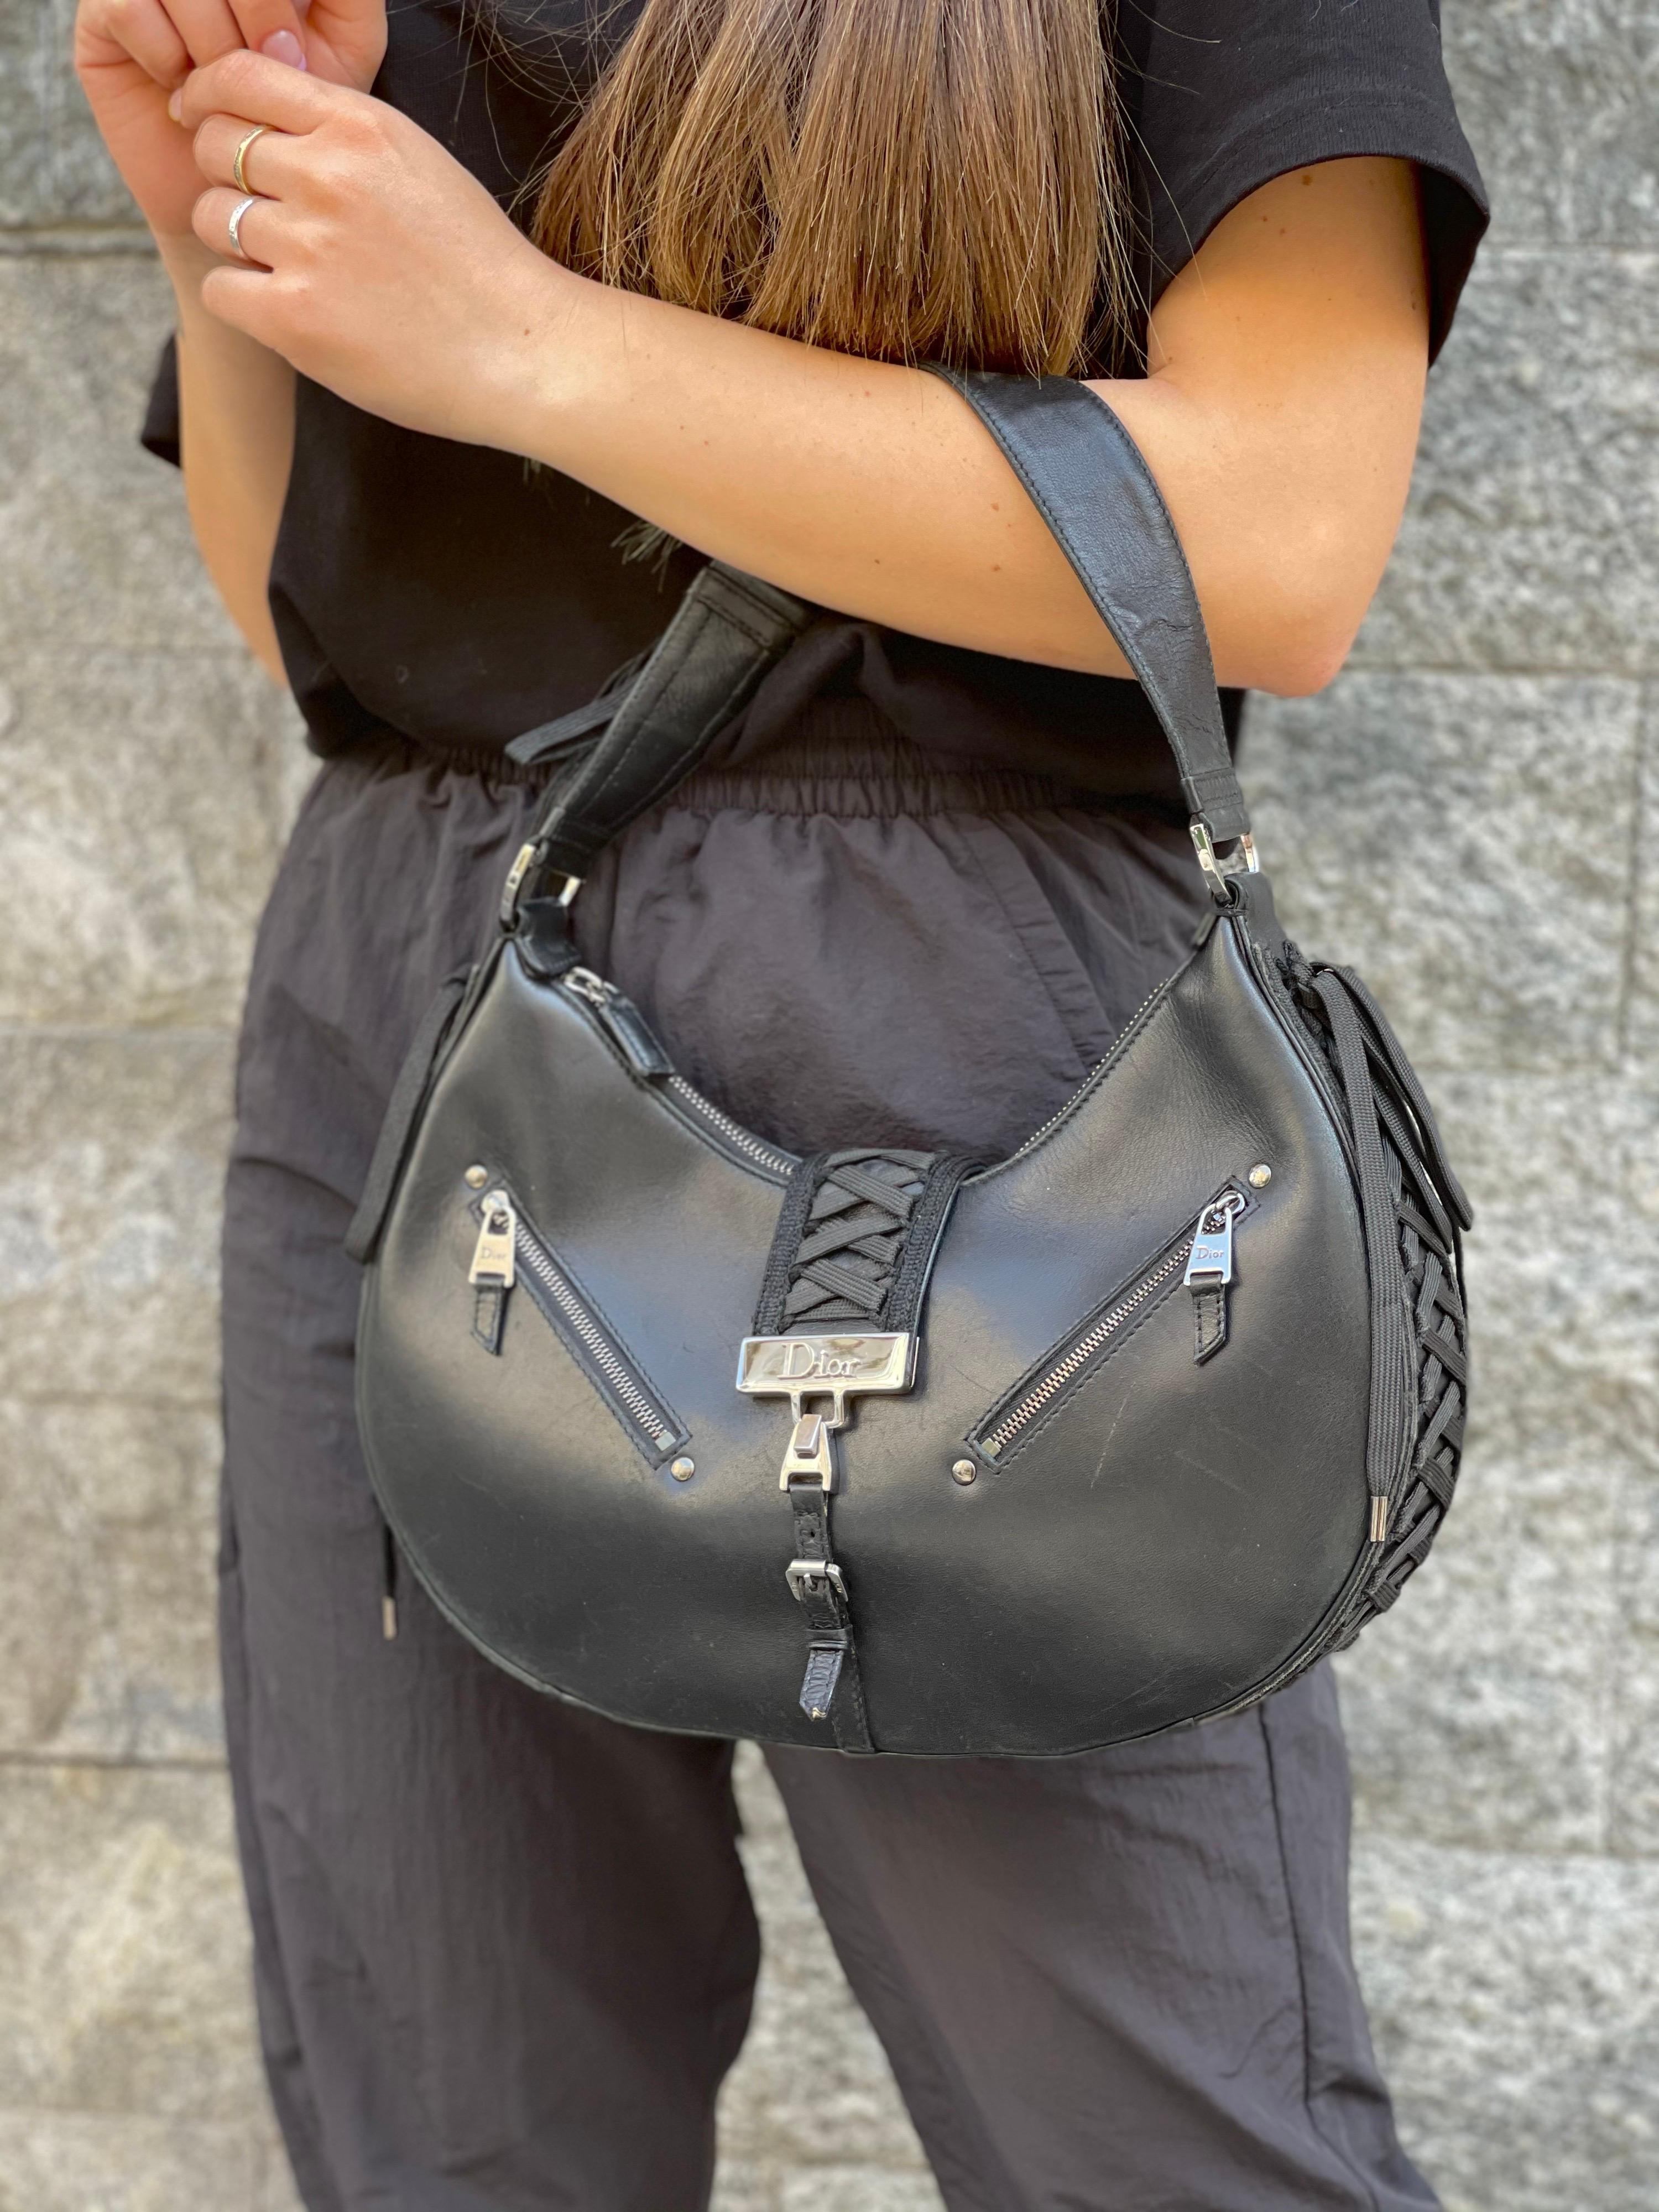 Vintage bag, signed Dior, made of black leather with silver hardware. Equipped with a hook and zip closure, internally lined in black fabric, quite roomy. Equipped with a 4 cm thick handle to wear the bag on the shoulder. It is in good condition.